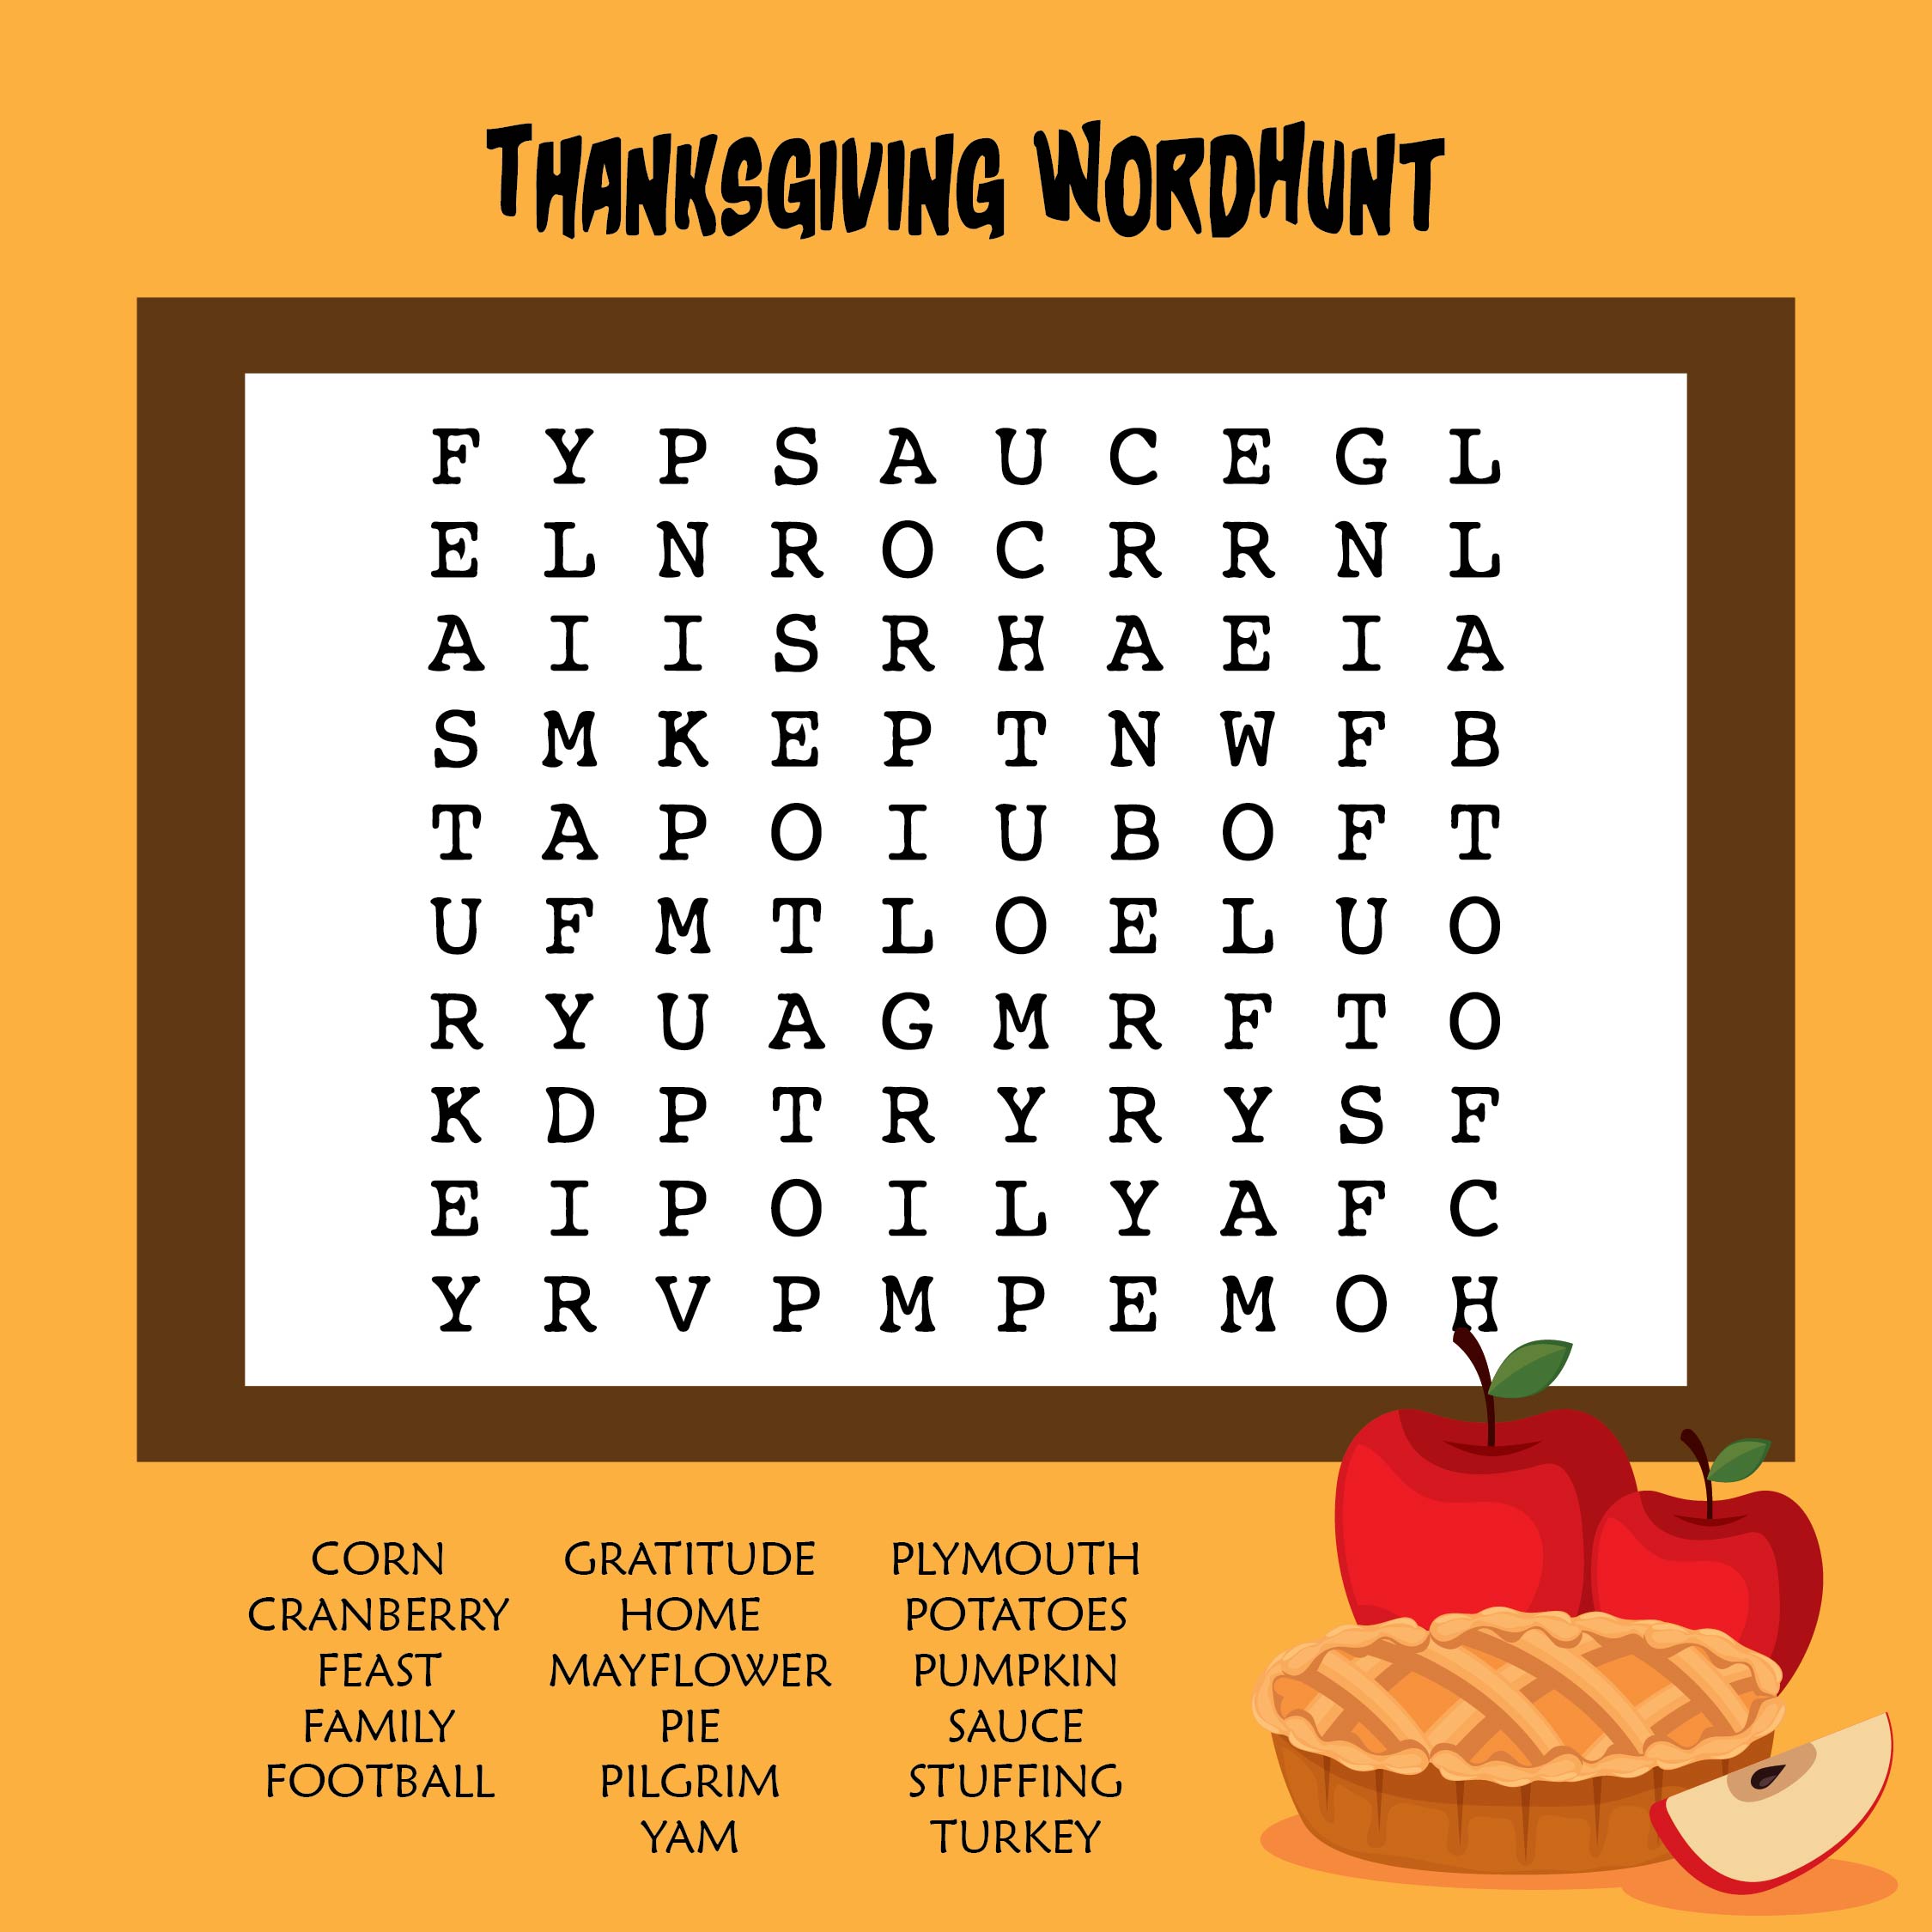 6-best-images-of-thanksgiving-words-printable-thanksgiving-word